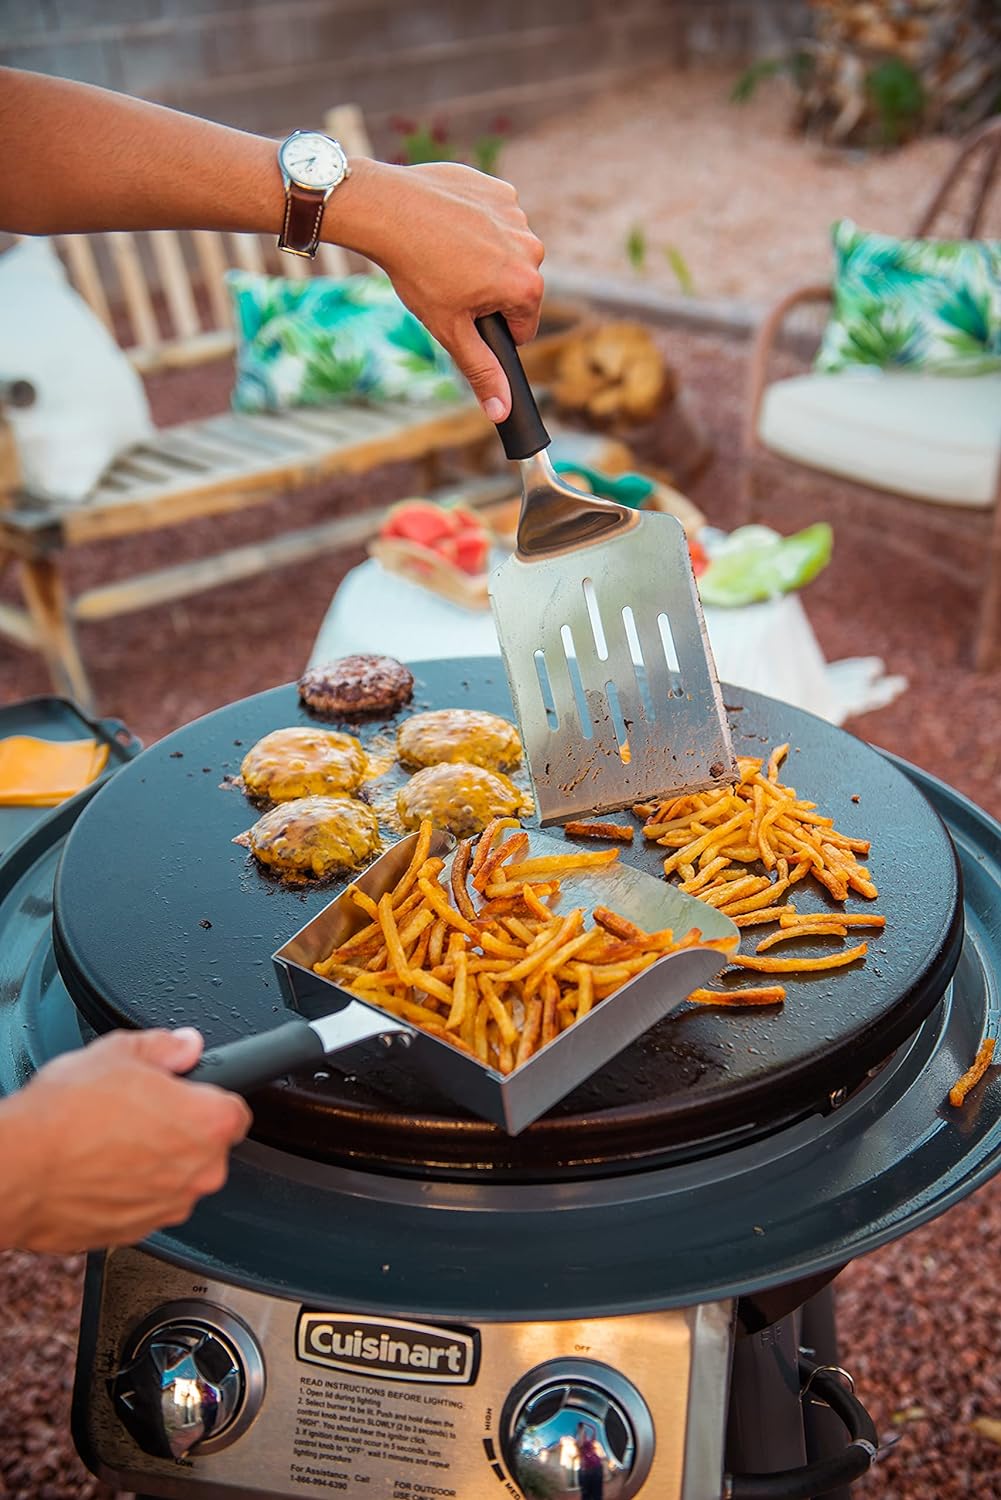 Cuisinart CGG-888 Outdoor Stainless Steel Lid, 360° Griddle Cooking Center - Cuisinart CGG-888 Griddle Cooking Center Review